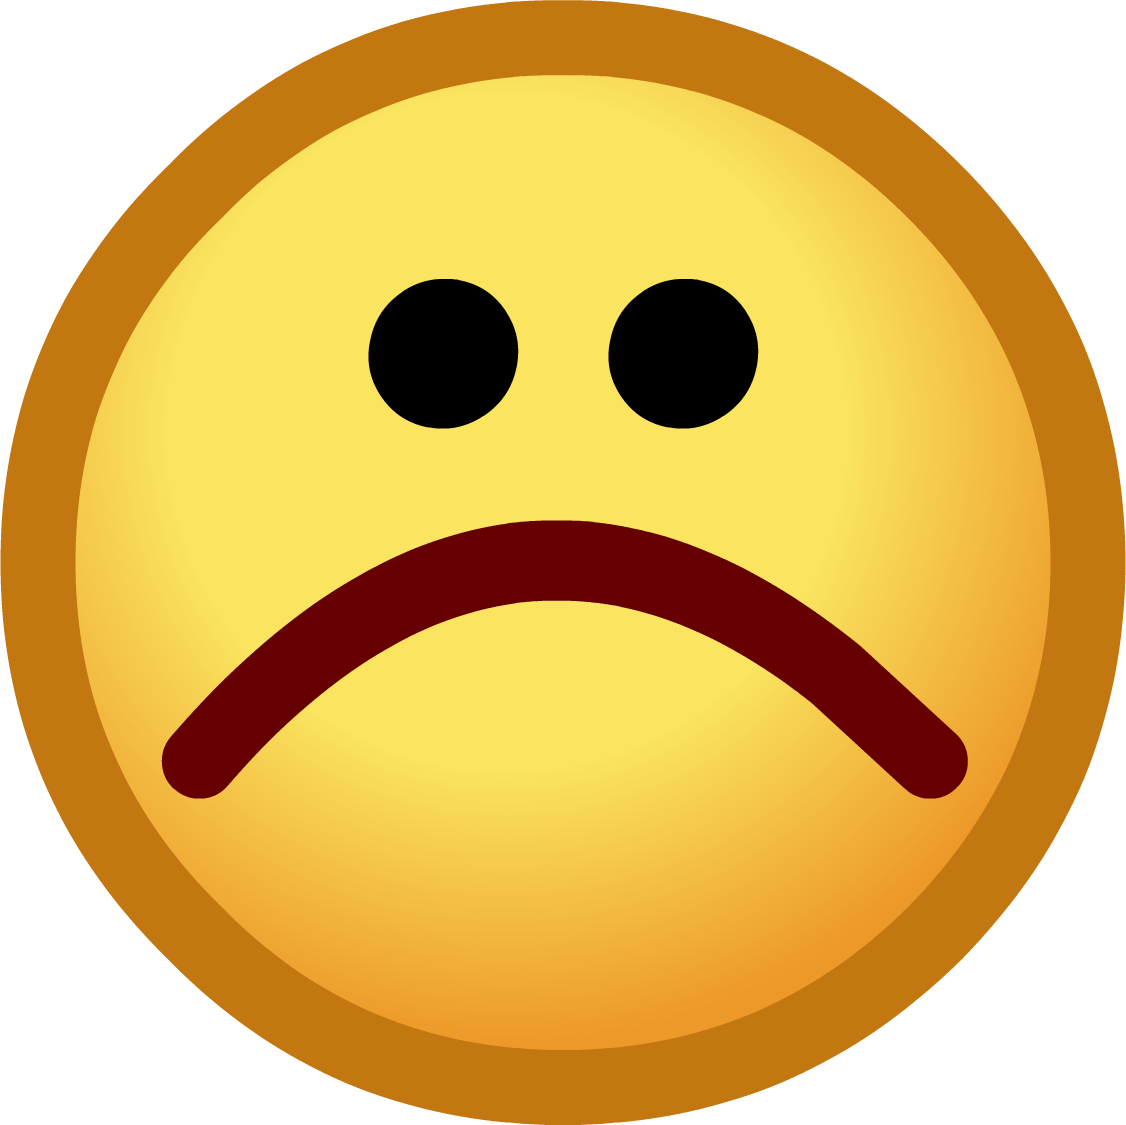 Upset Smiley Face Images  Pictures - Becuo